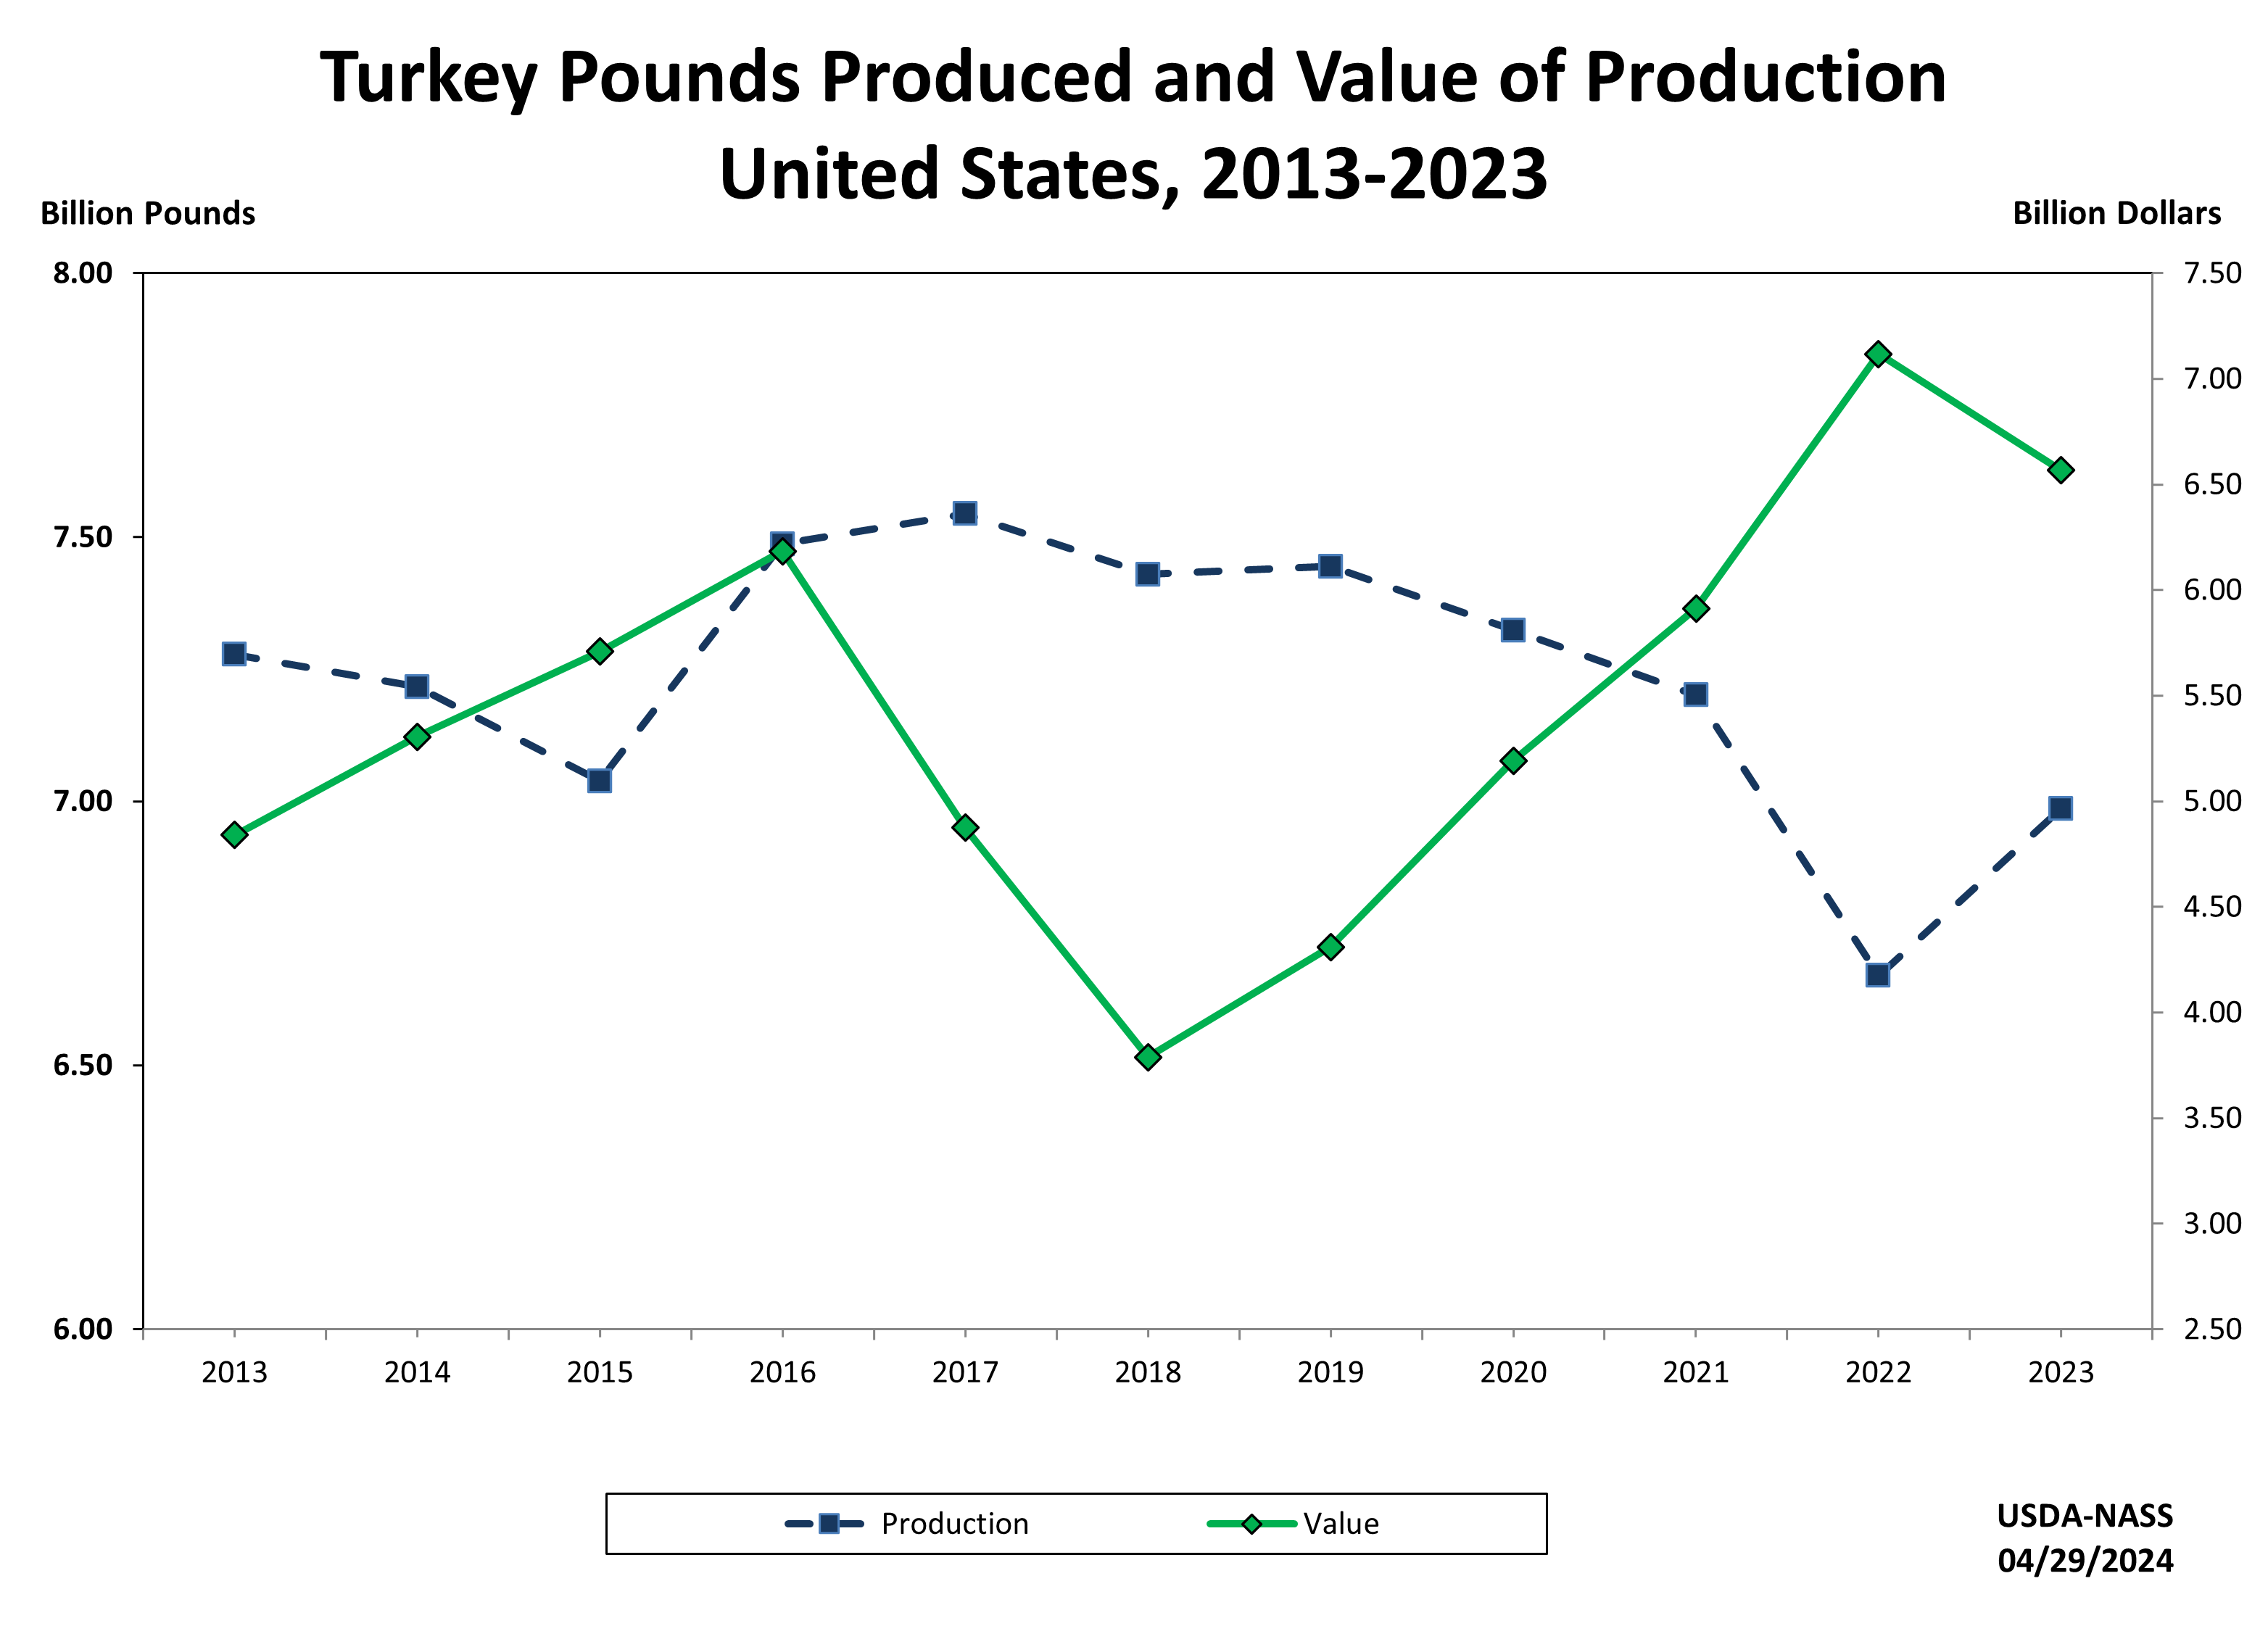 Turkeys: Production and Value of Production by Year, US